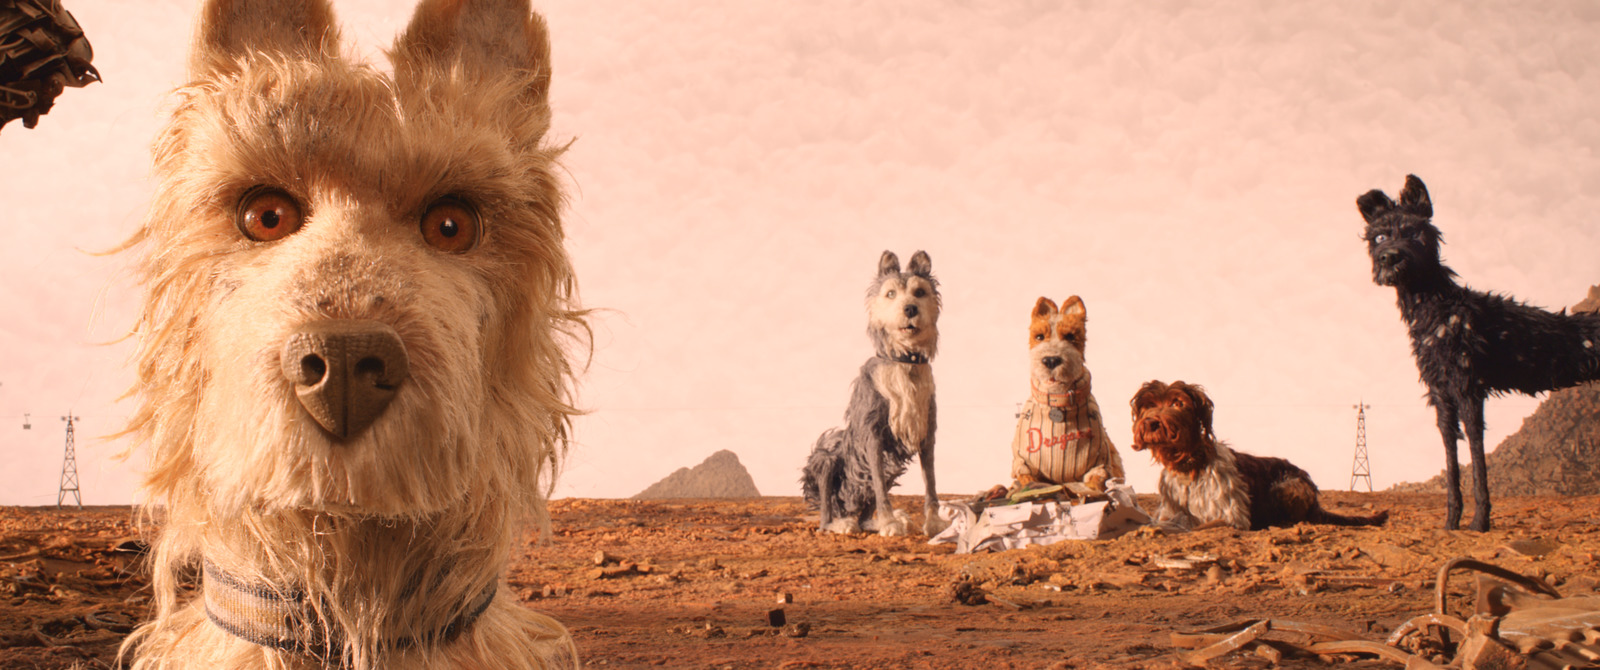 Wes Anderson’s animation Isle of Dogs will open the 14th Glasgow Film Festival.